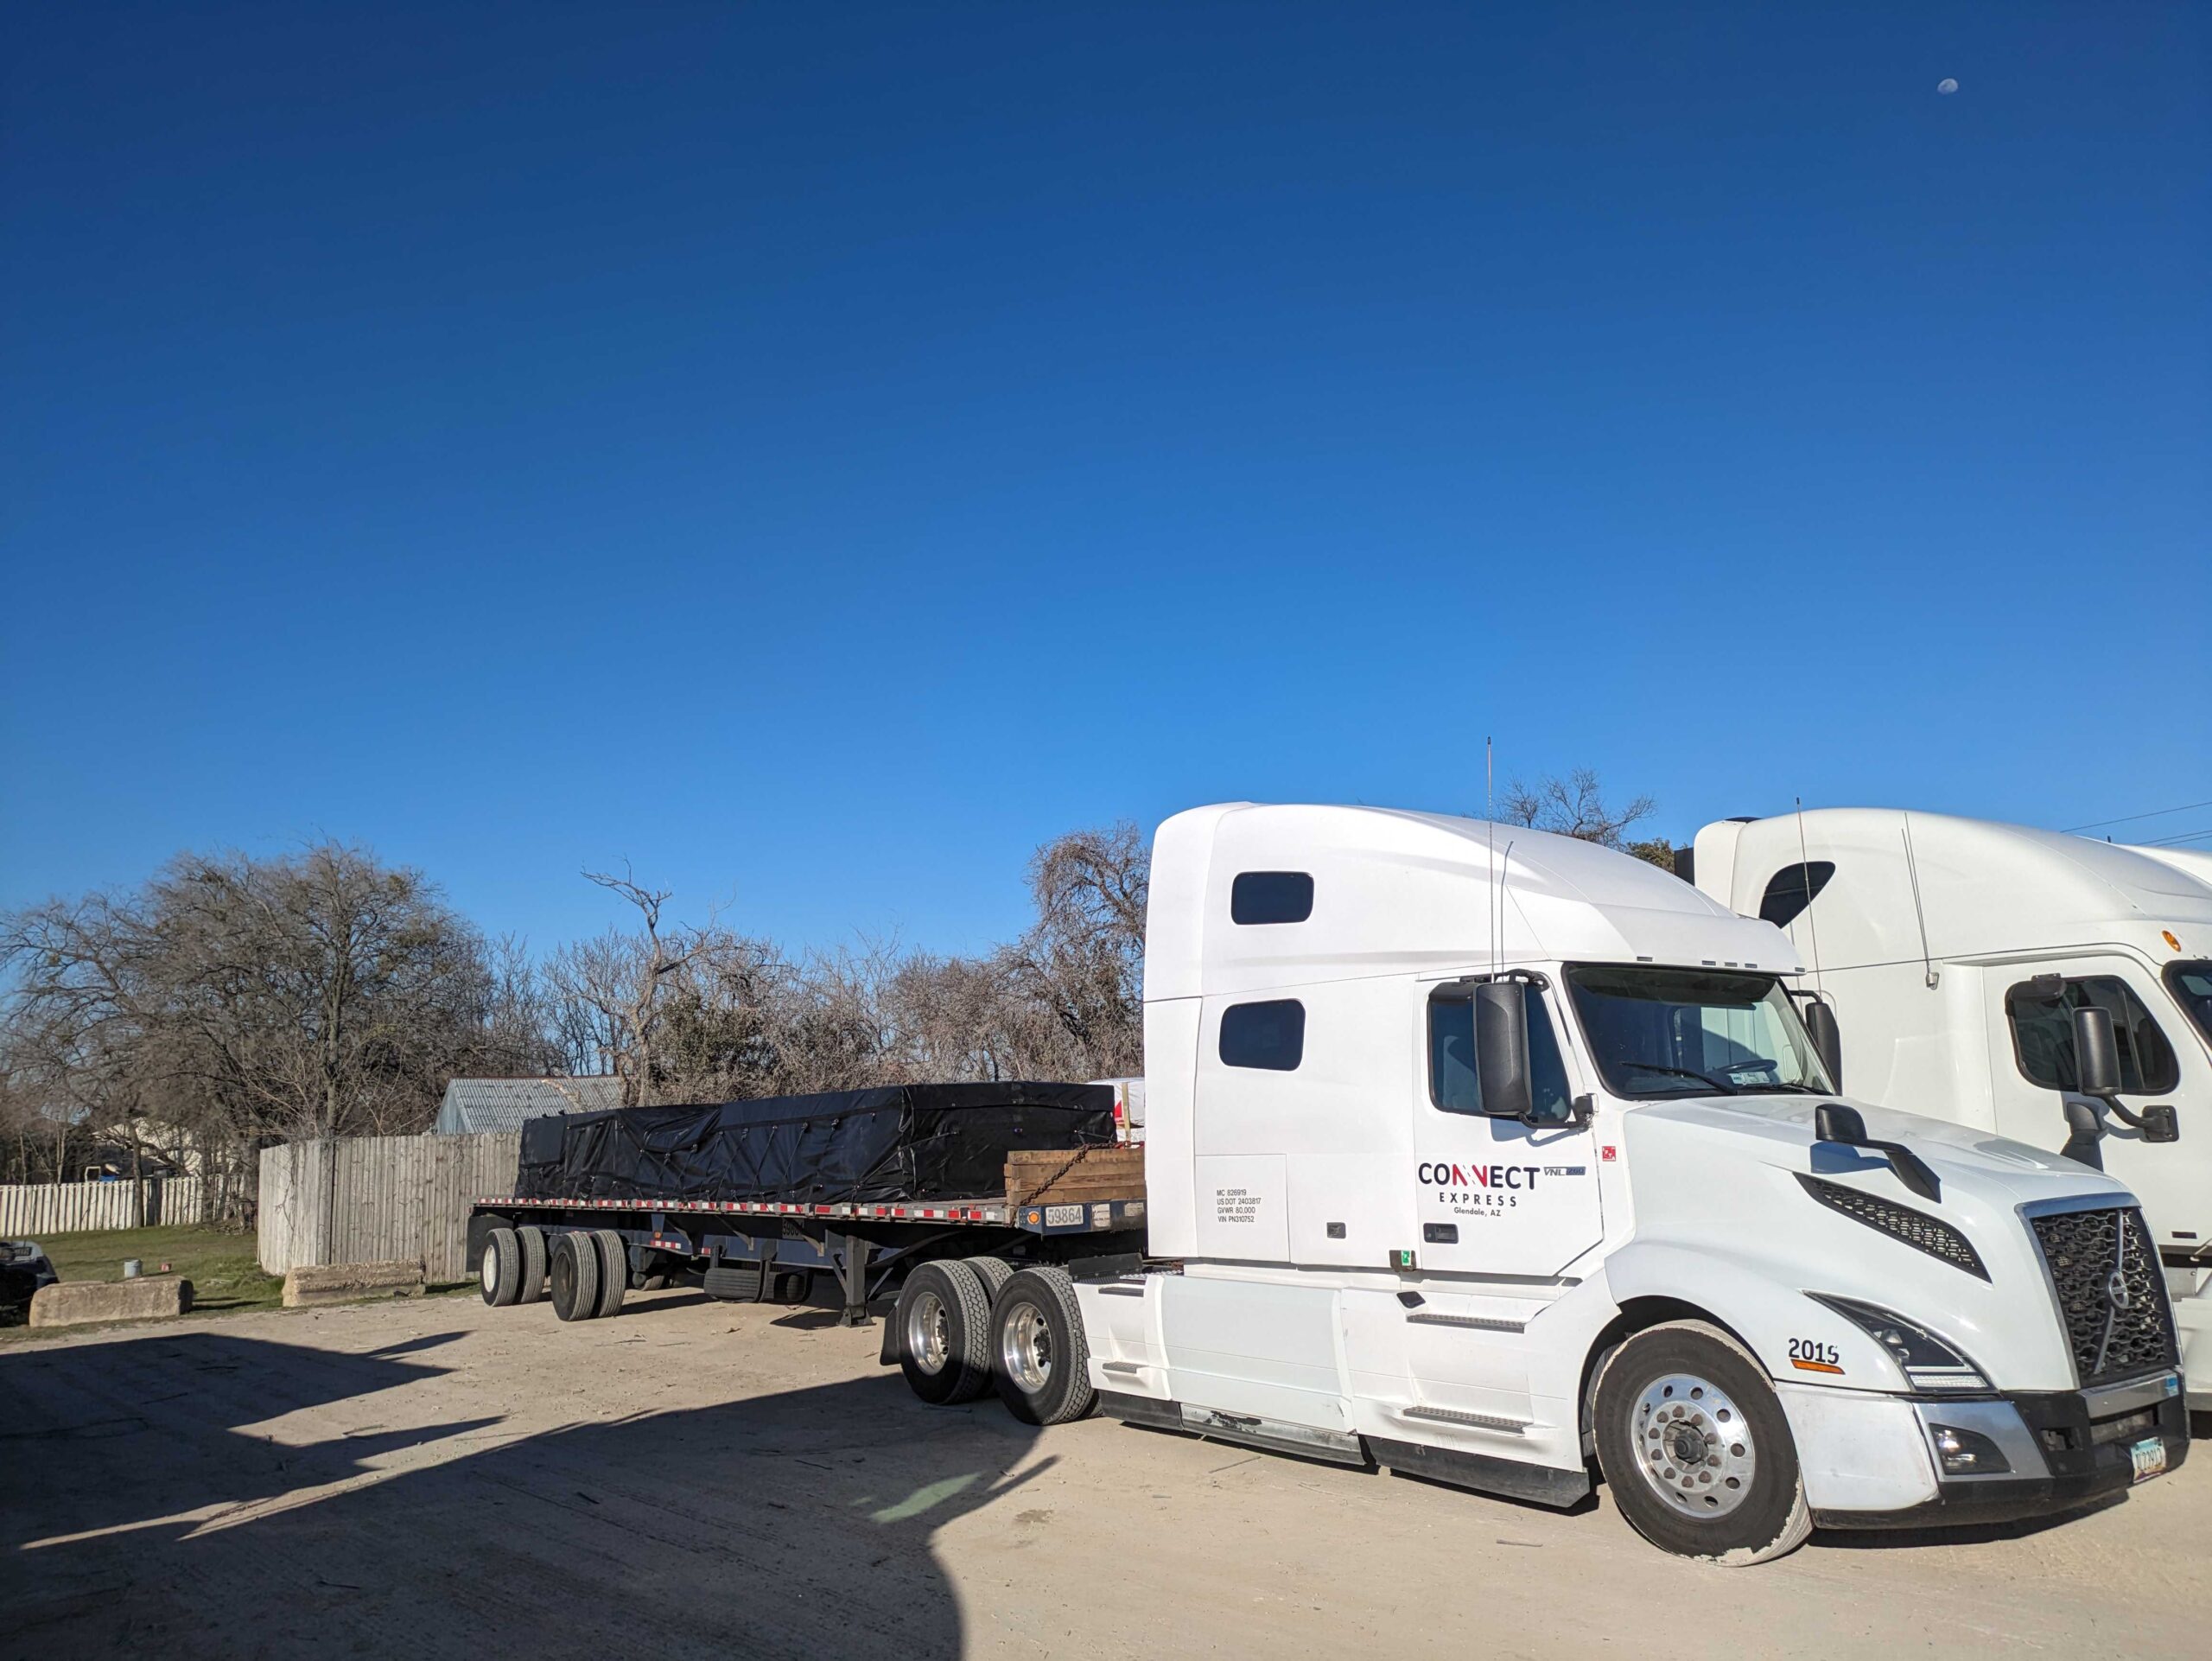 Flatbed Trucking Jobs: Requirements, Salaries, and Opportunities